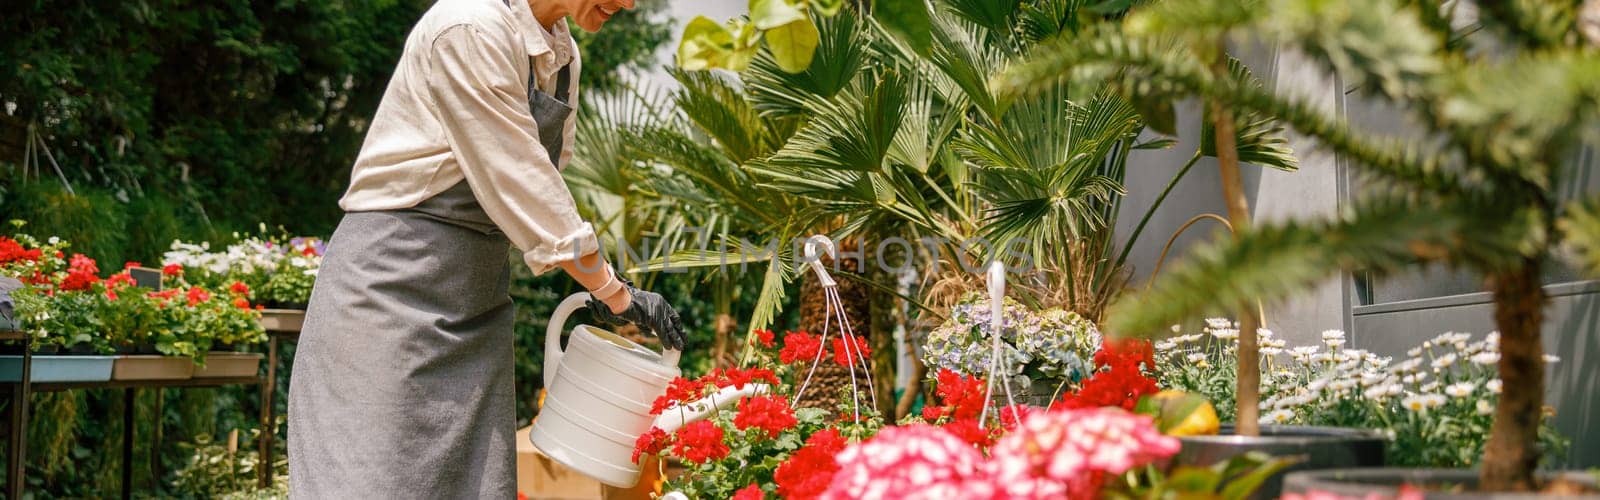 Smiling woman florist taking care of plant watering it in floral shop. High quality photo